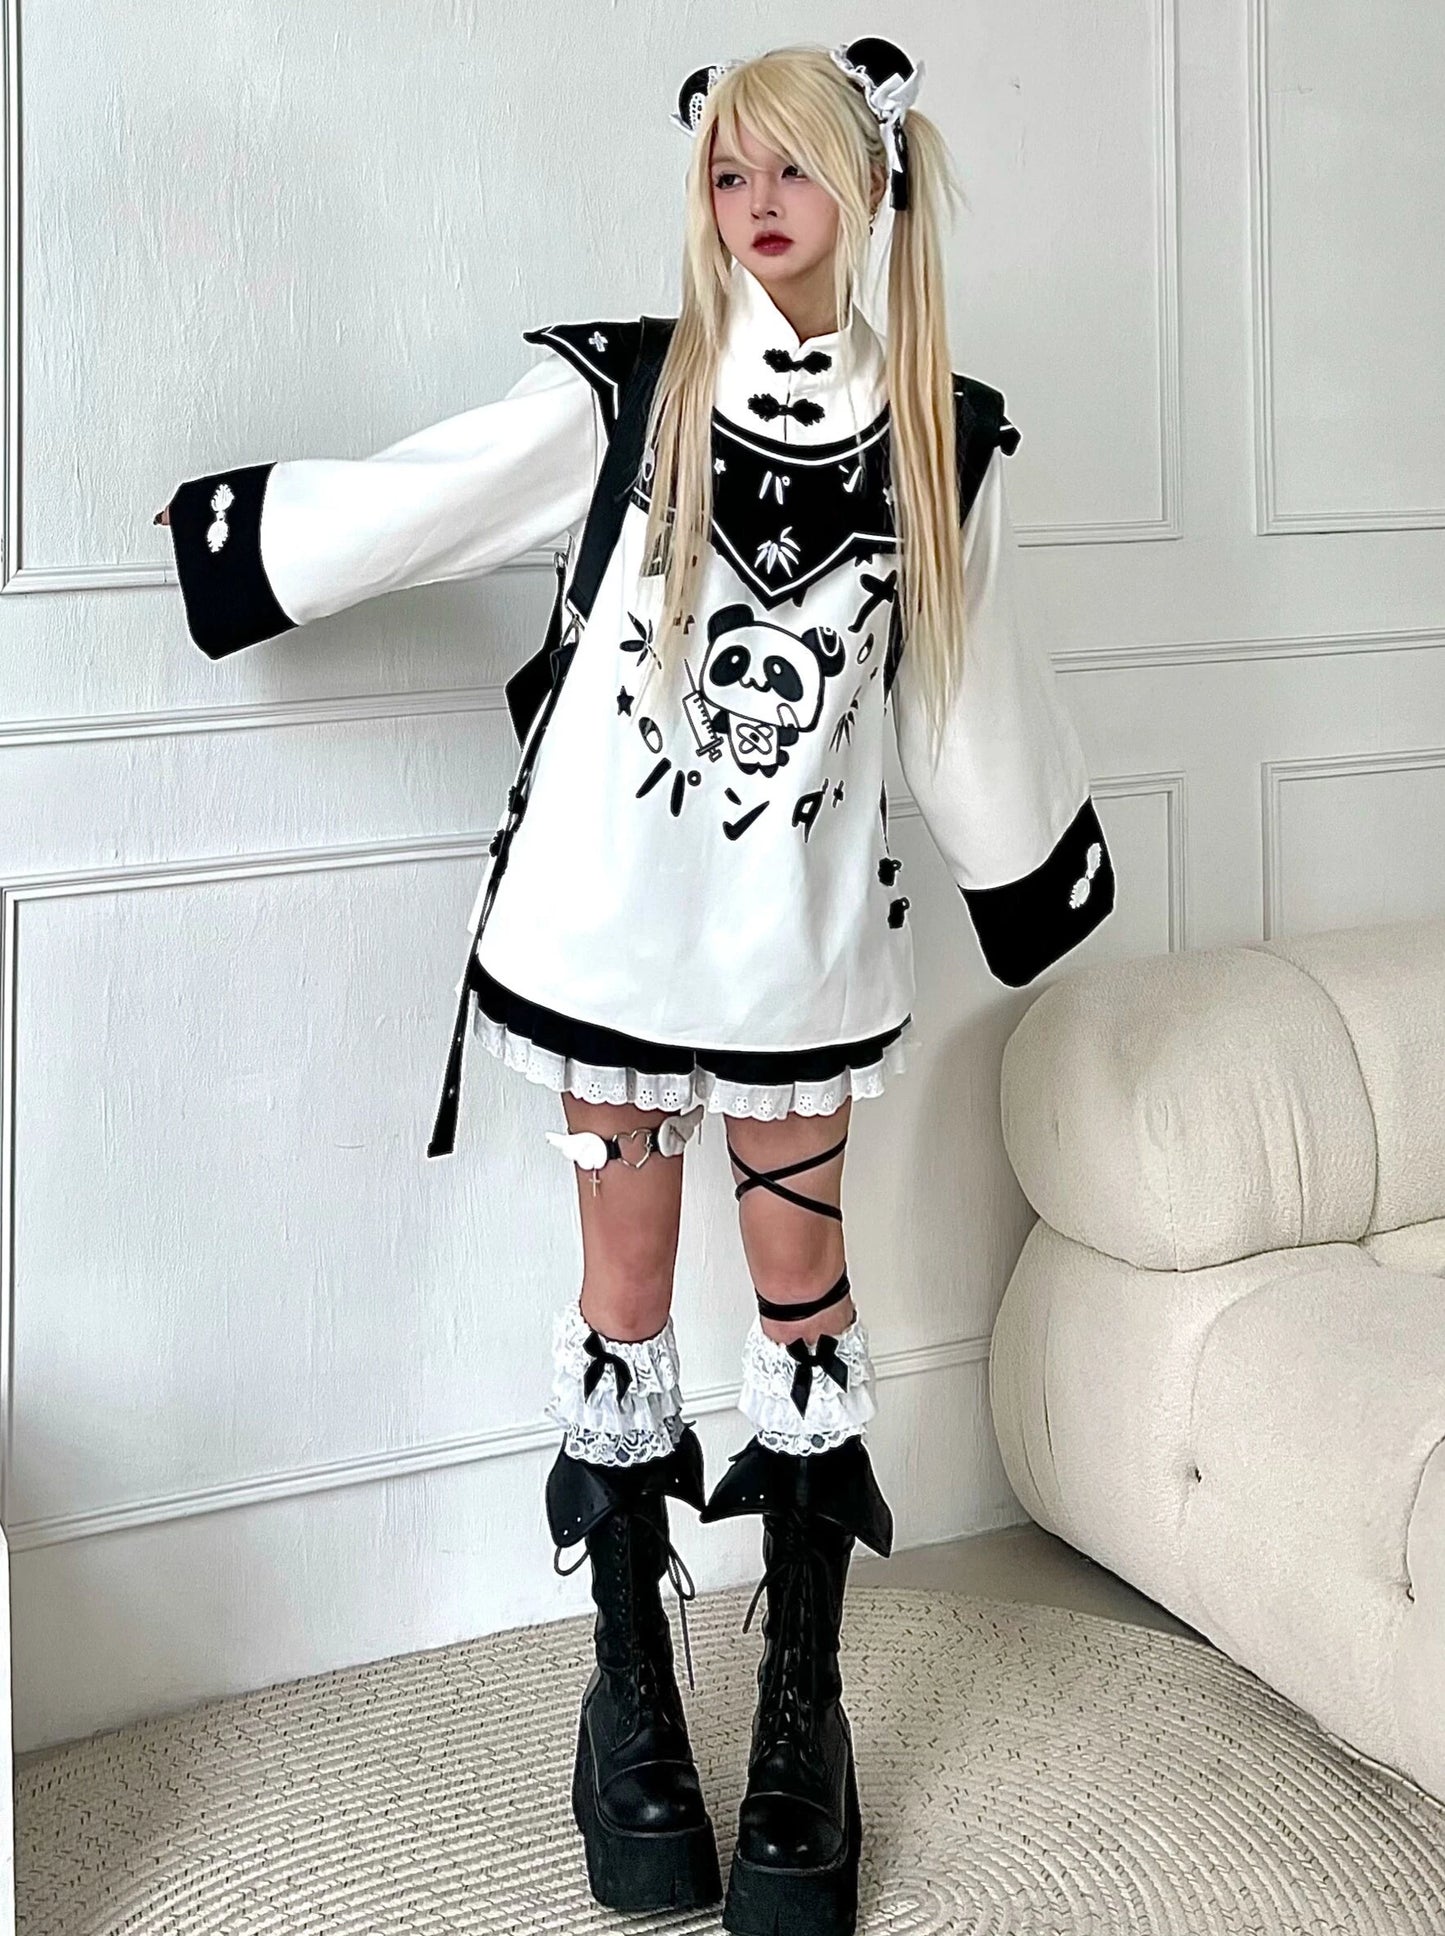 Next Era/Original Chinese Panda Two-Yuan Heavy Industry Embroidery False Collar Chinese Disc Buckle Loose and Cute Long Sleeves